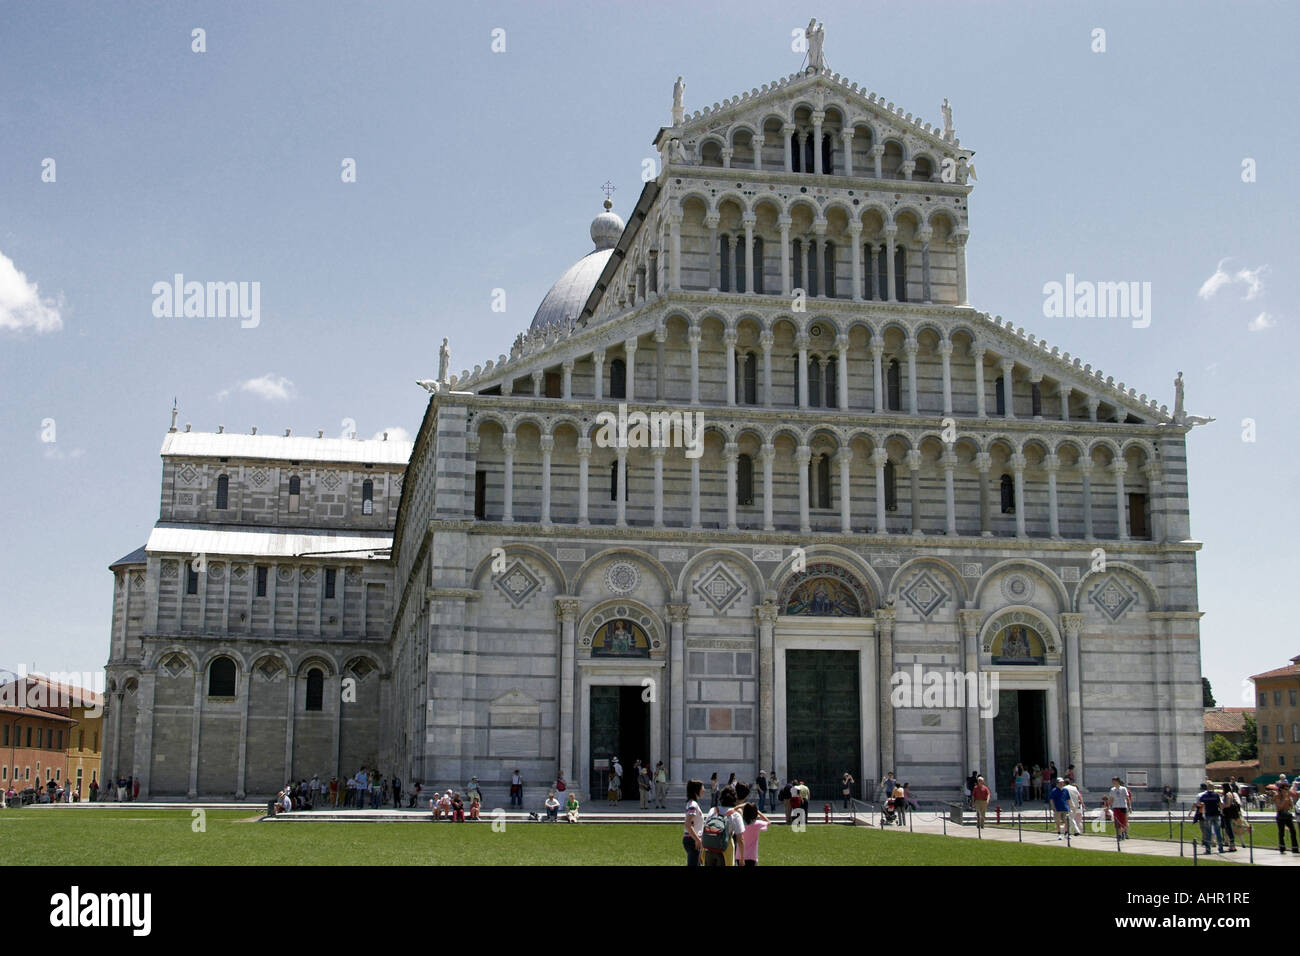 The Duomo in the Campo dei Miricles, the field of miracles. Pisa, Italy. Stock Photo